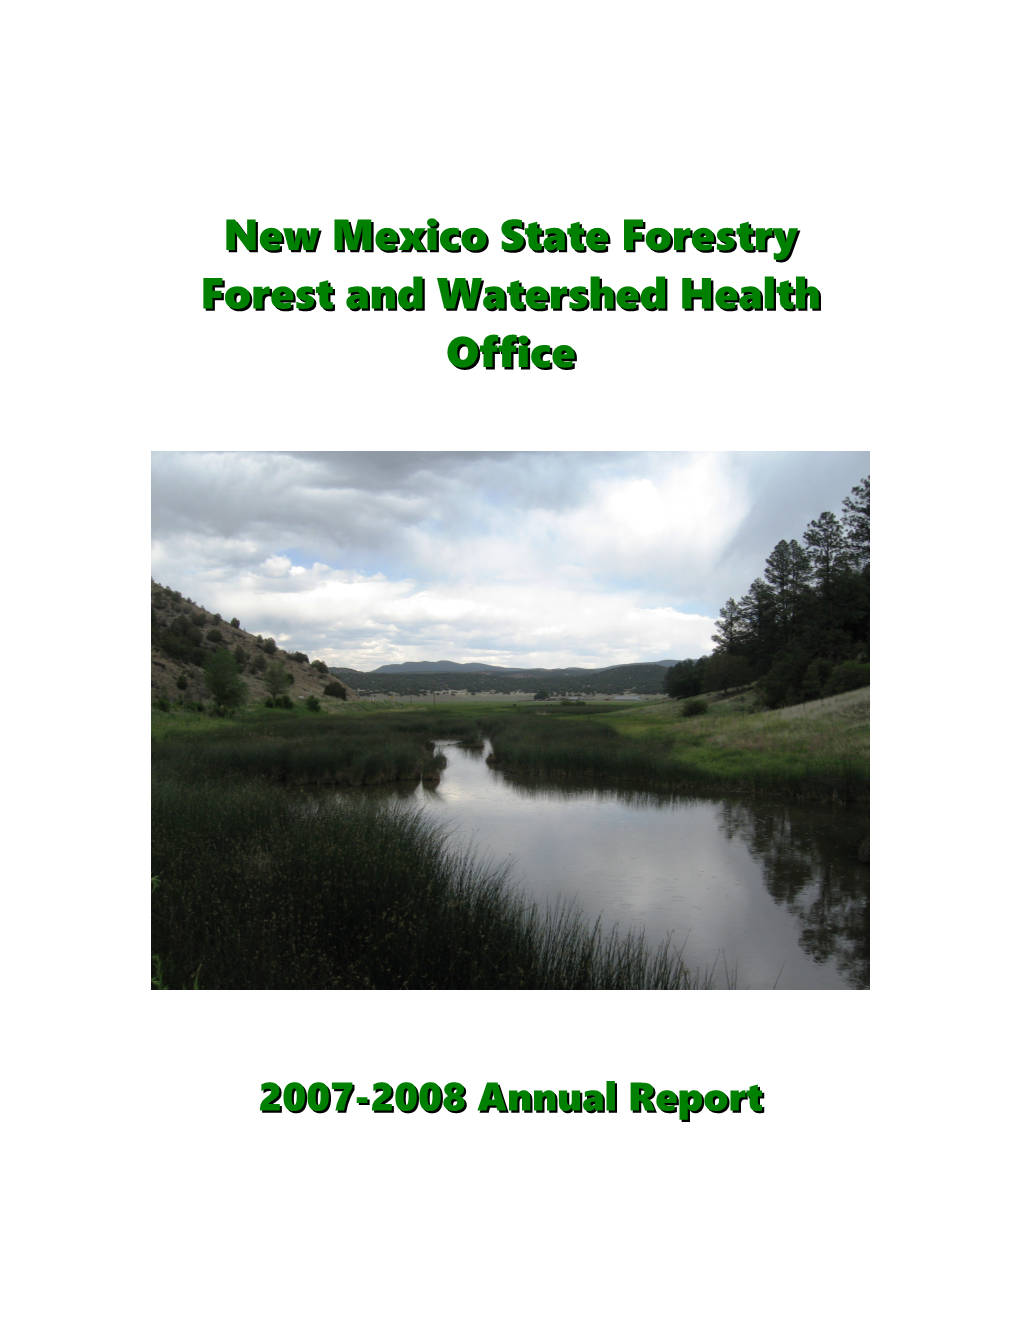 Forest and Watershed Health Office